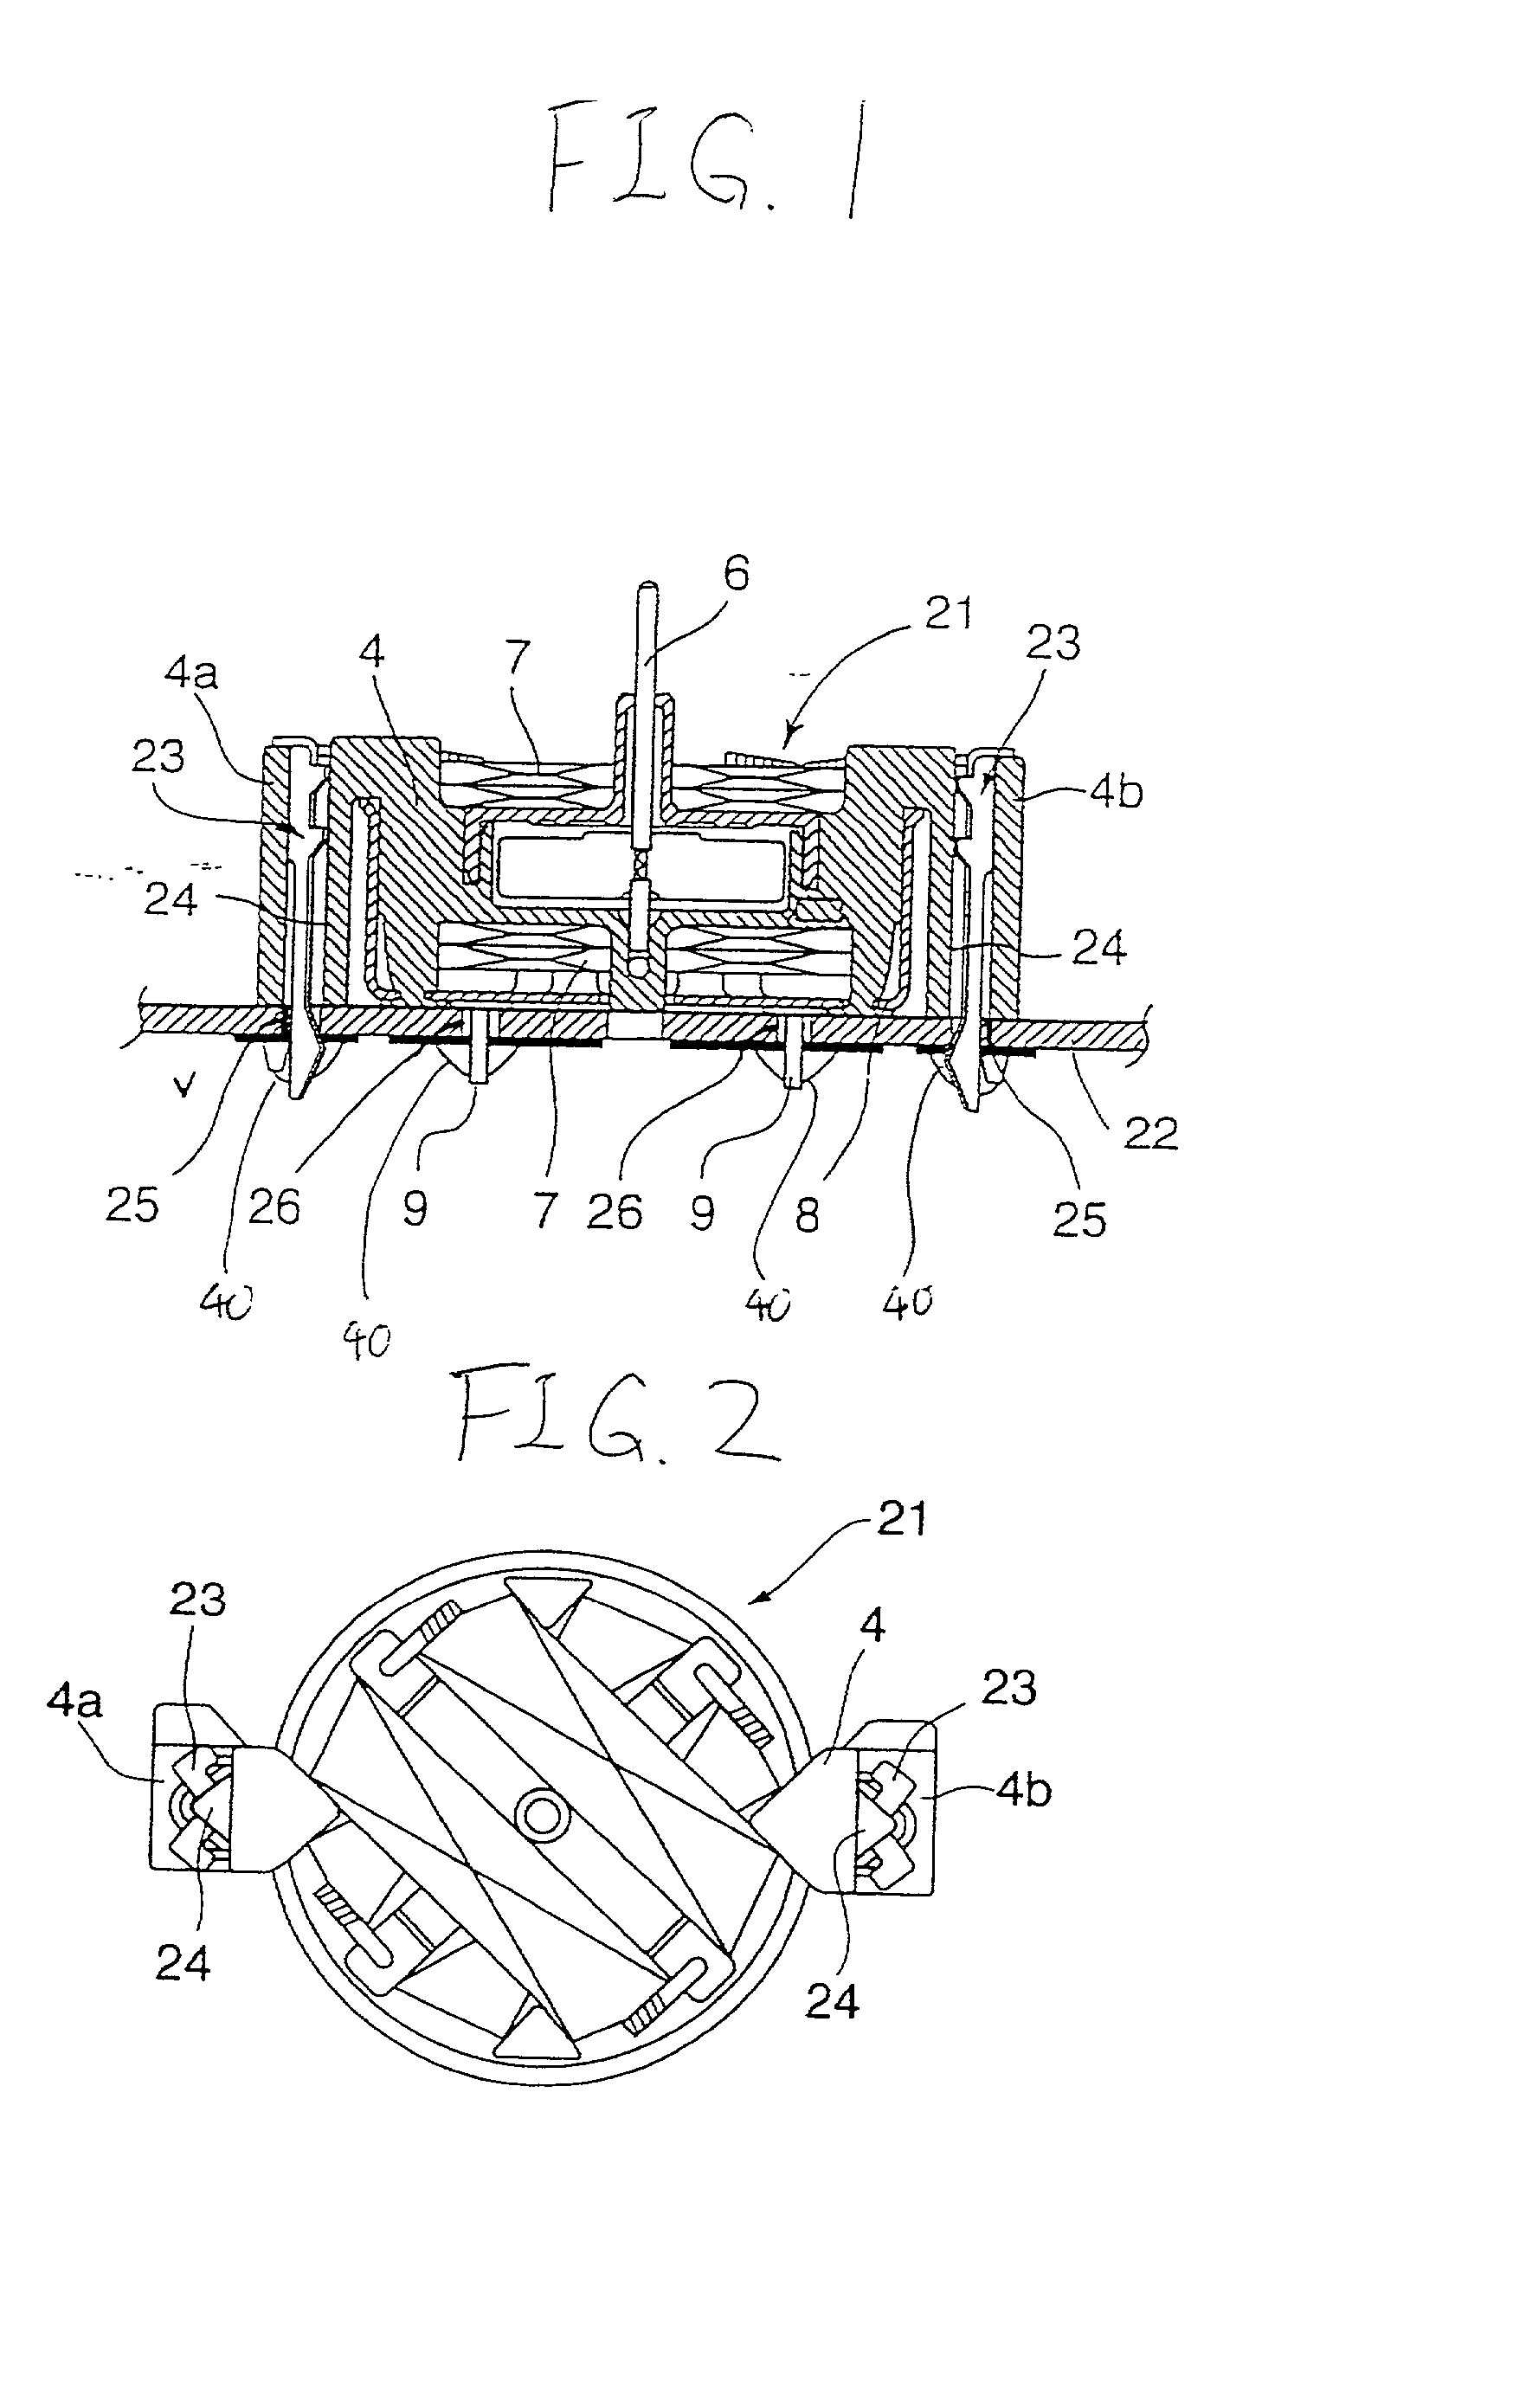 Attachment structure of electronic component to circuit board and clip used in attachment of the electronic component